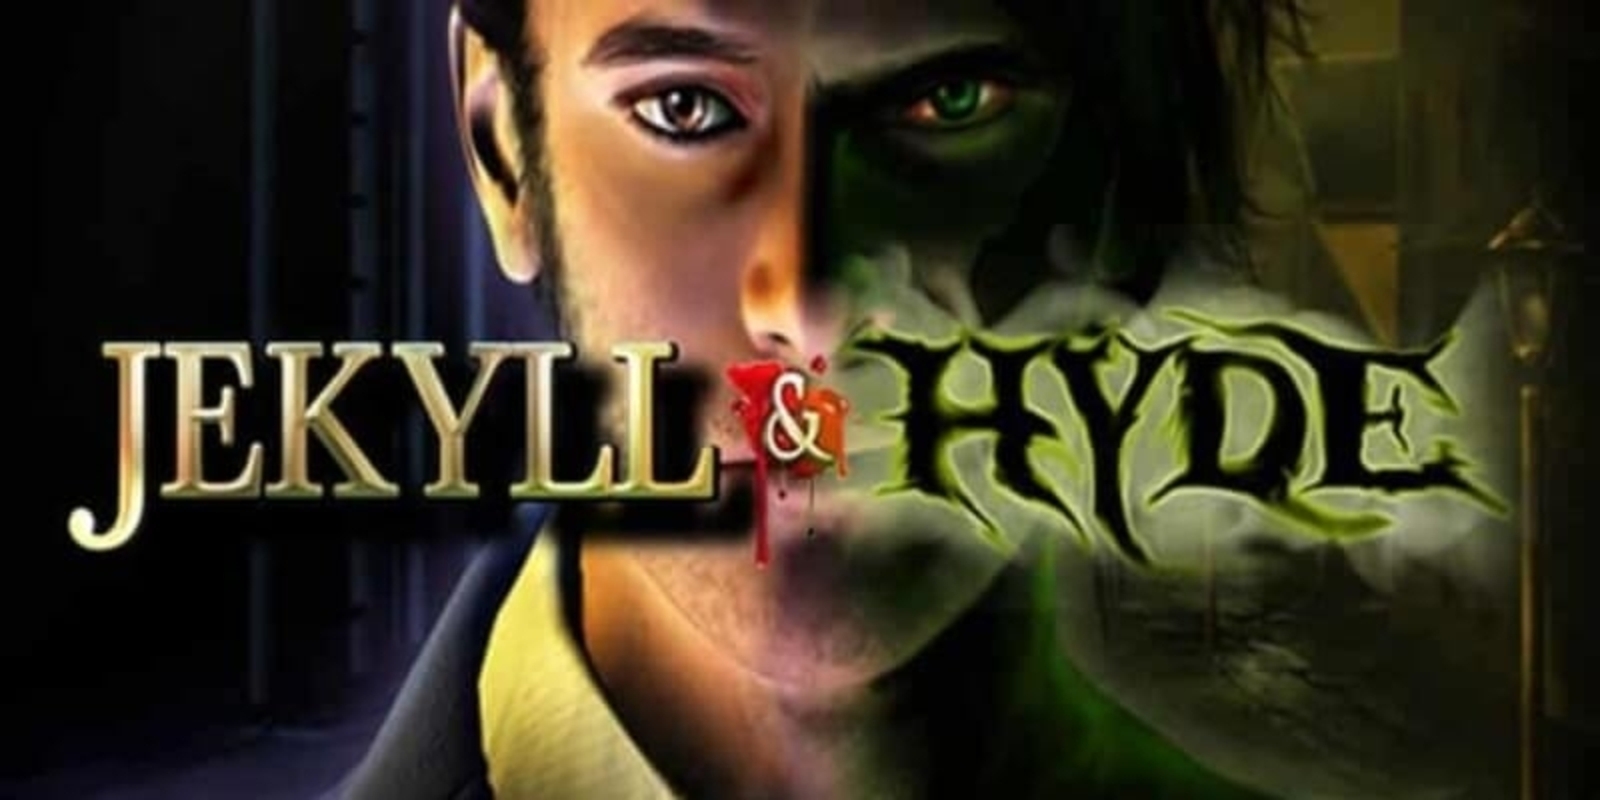 Jekyll And Hyde